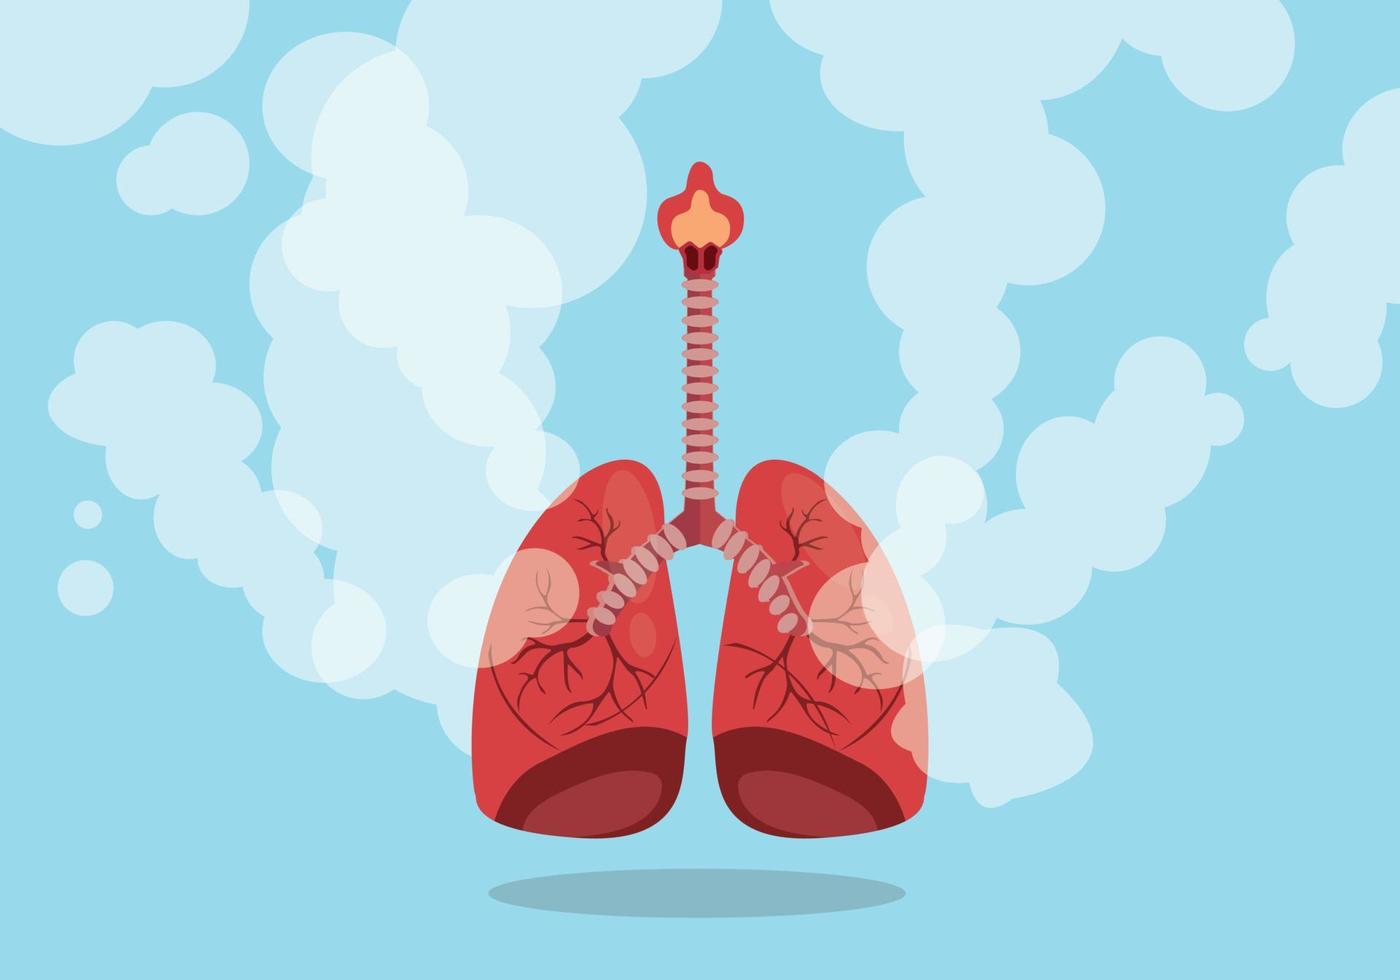 lungs on smoke unhealthy sign with flat blue background style vector graphic illustration